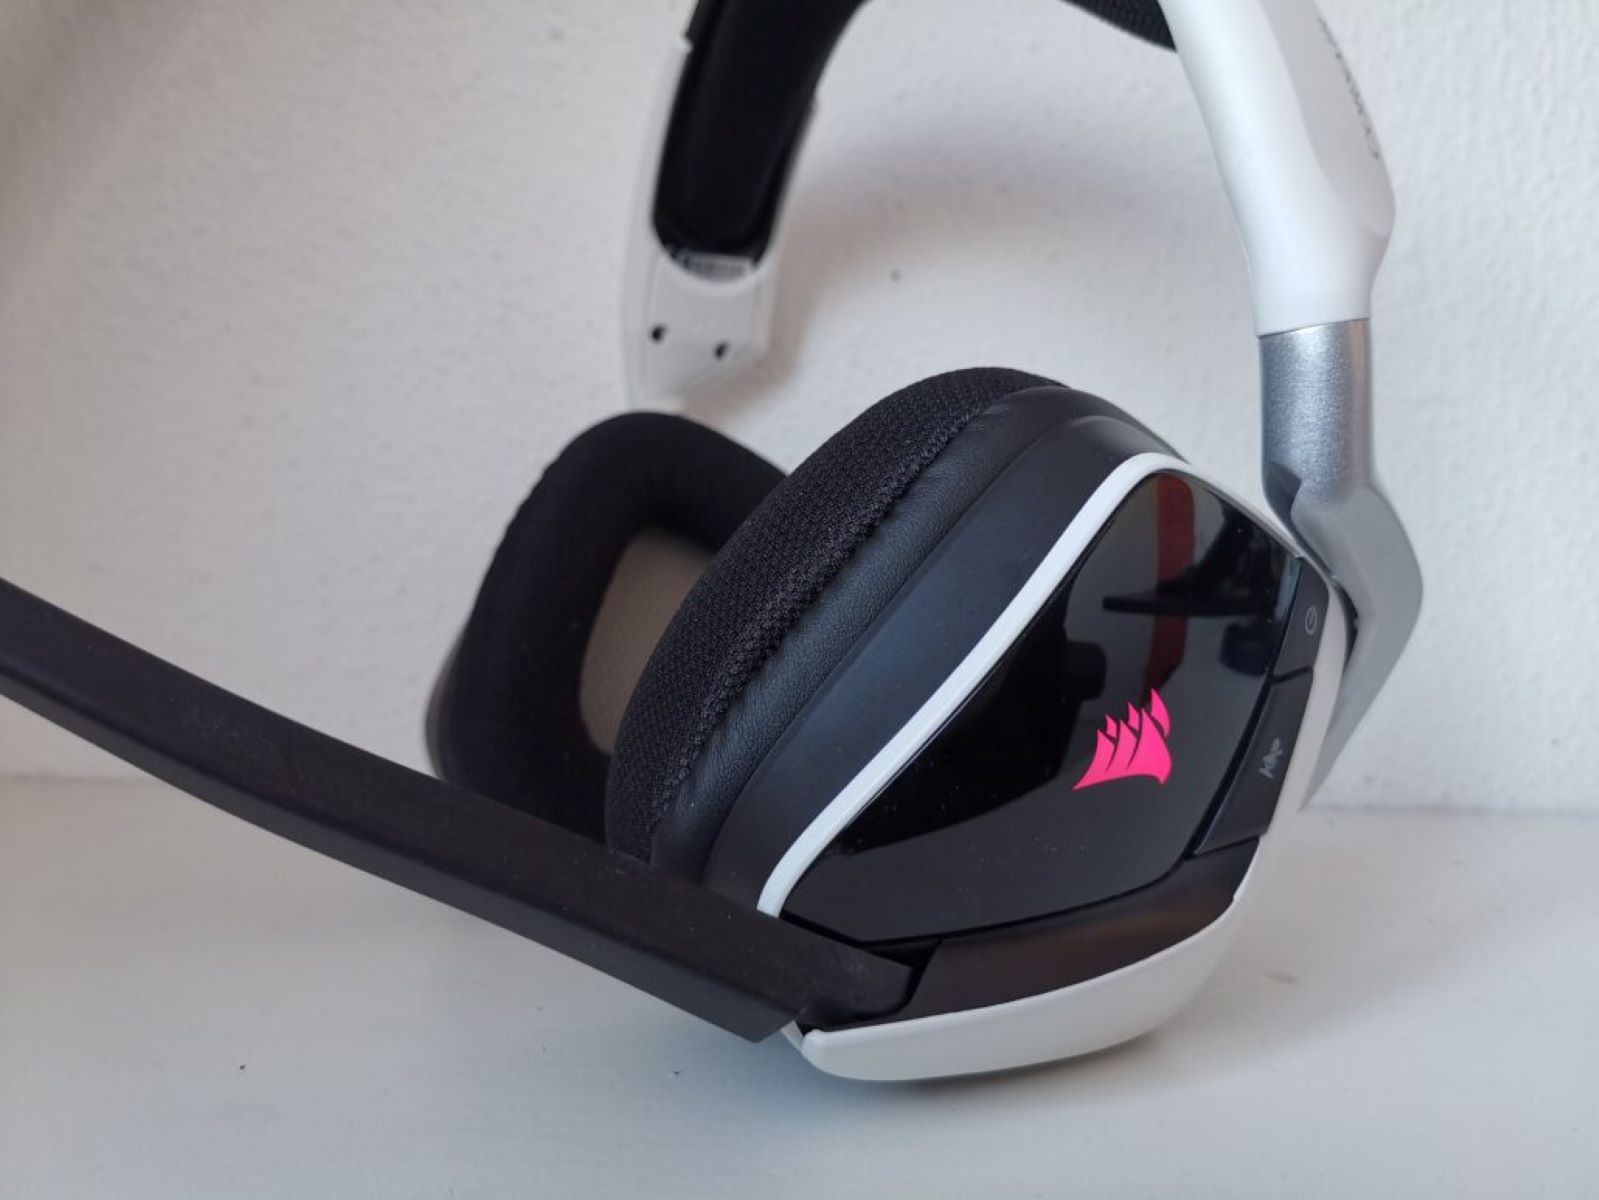 How To Pair The Void Wireless Headset